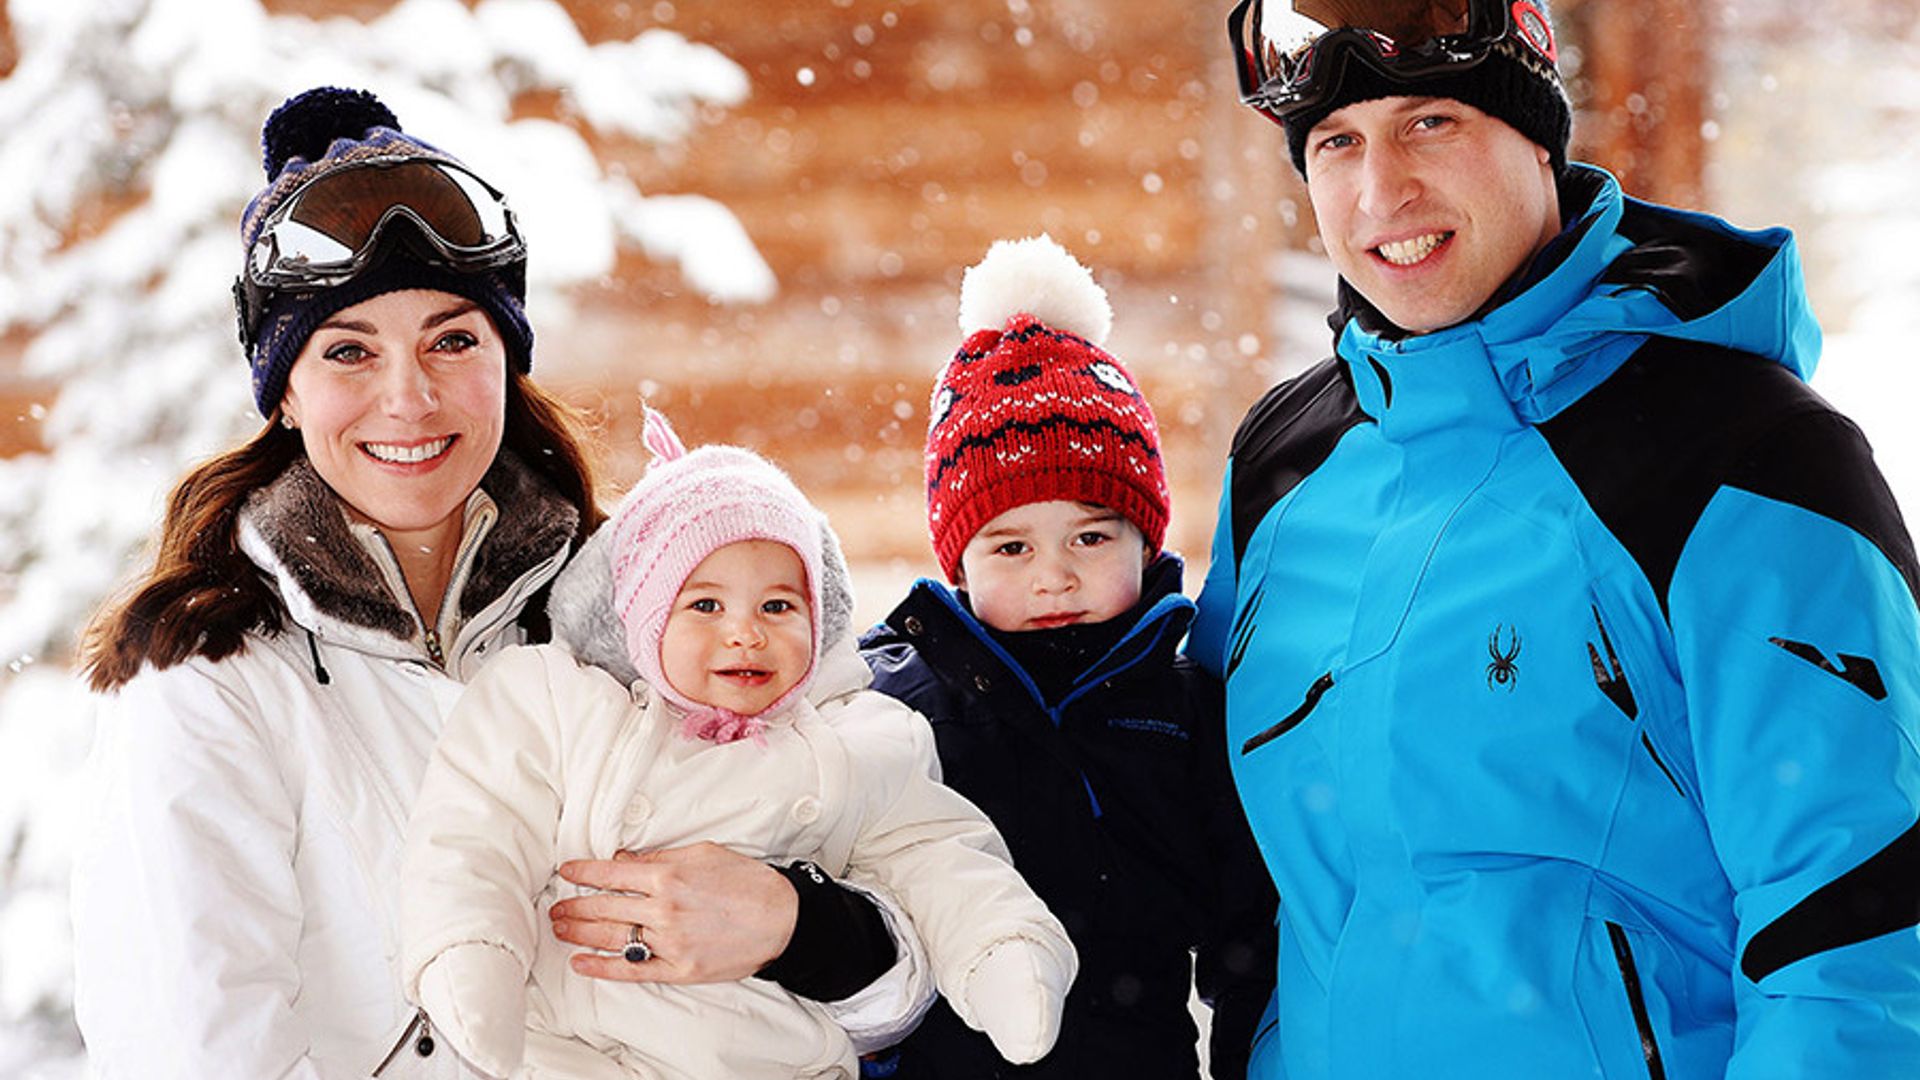 Prince William and Kate Middleton's Christmas plans for George and Charlotte 